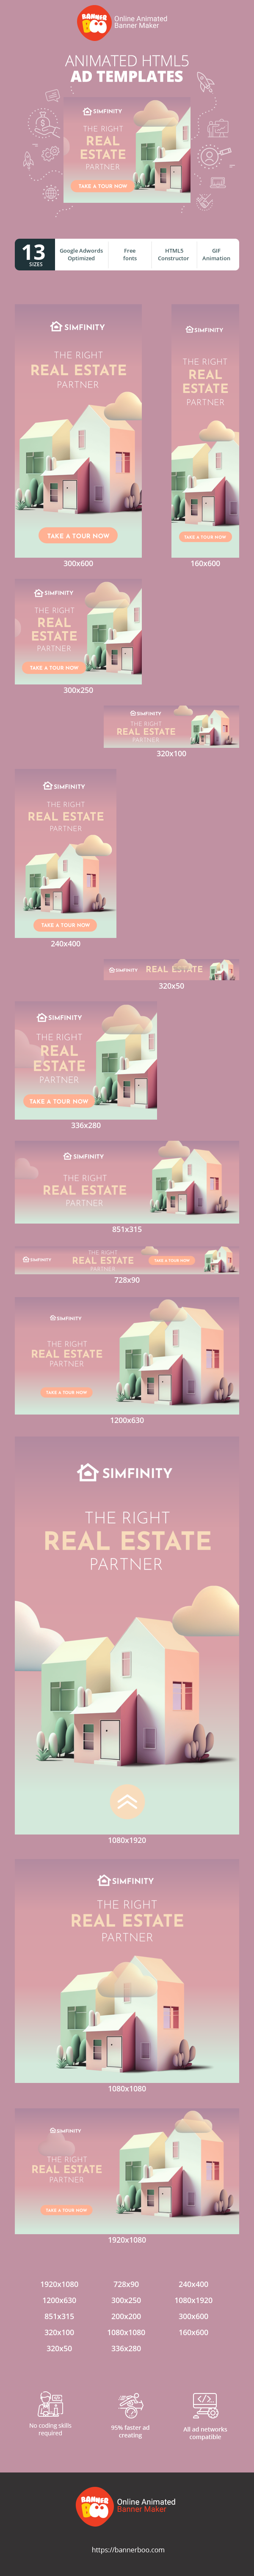 Banner ad template — The Right Real Estate Partner — Real Estate